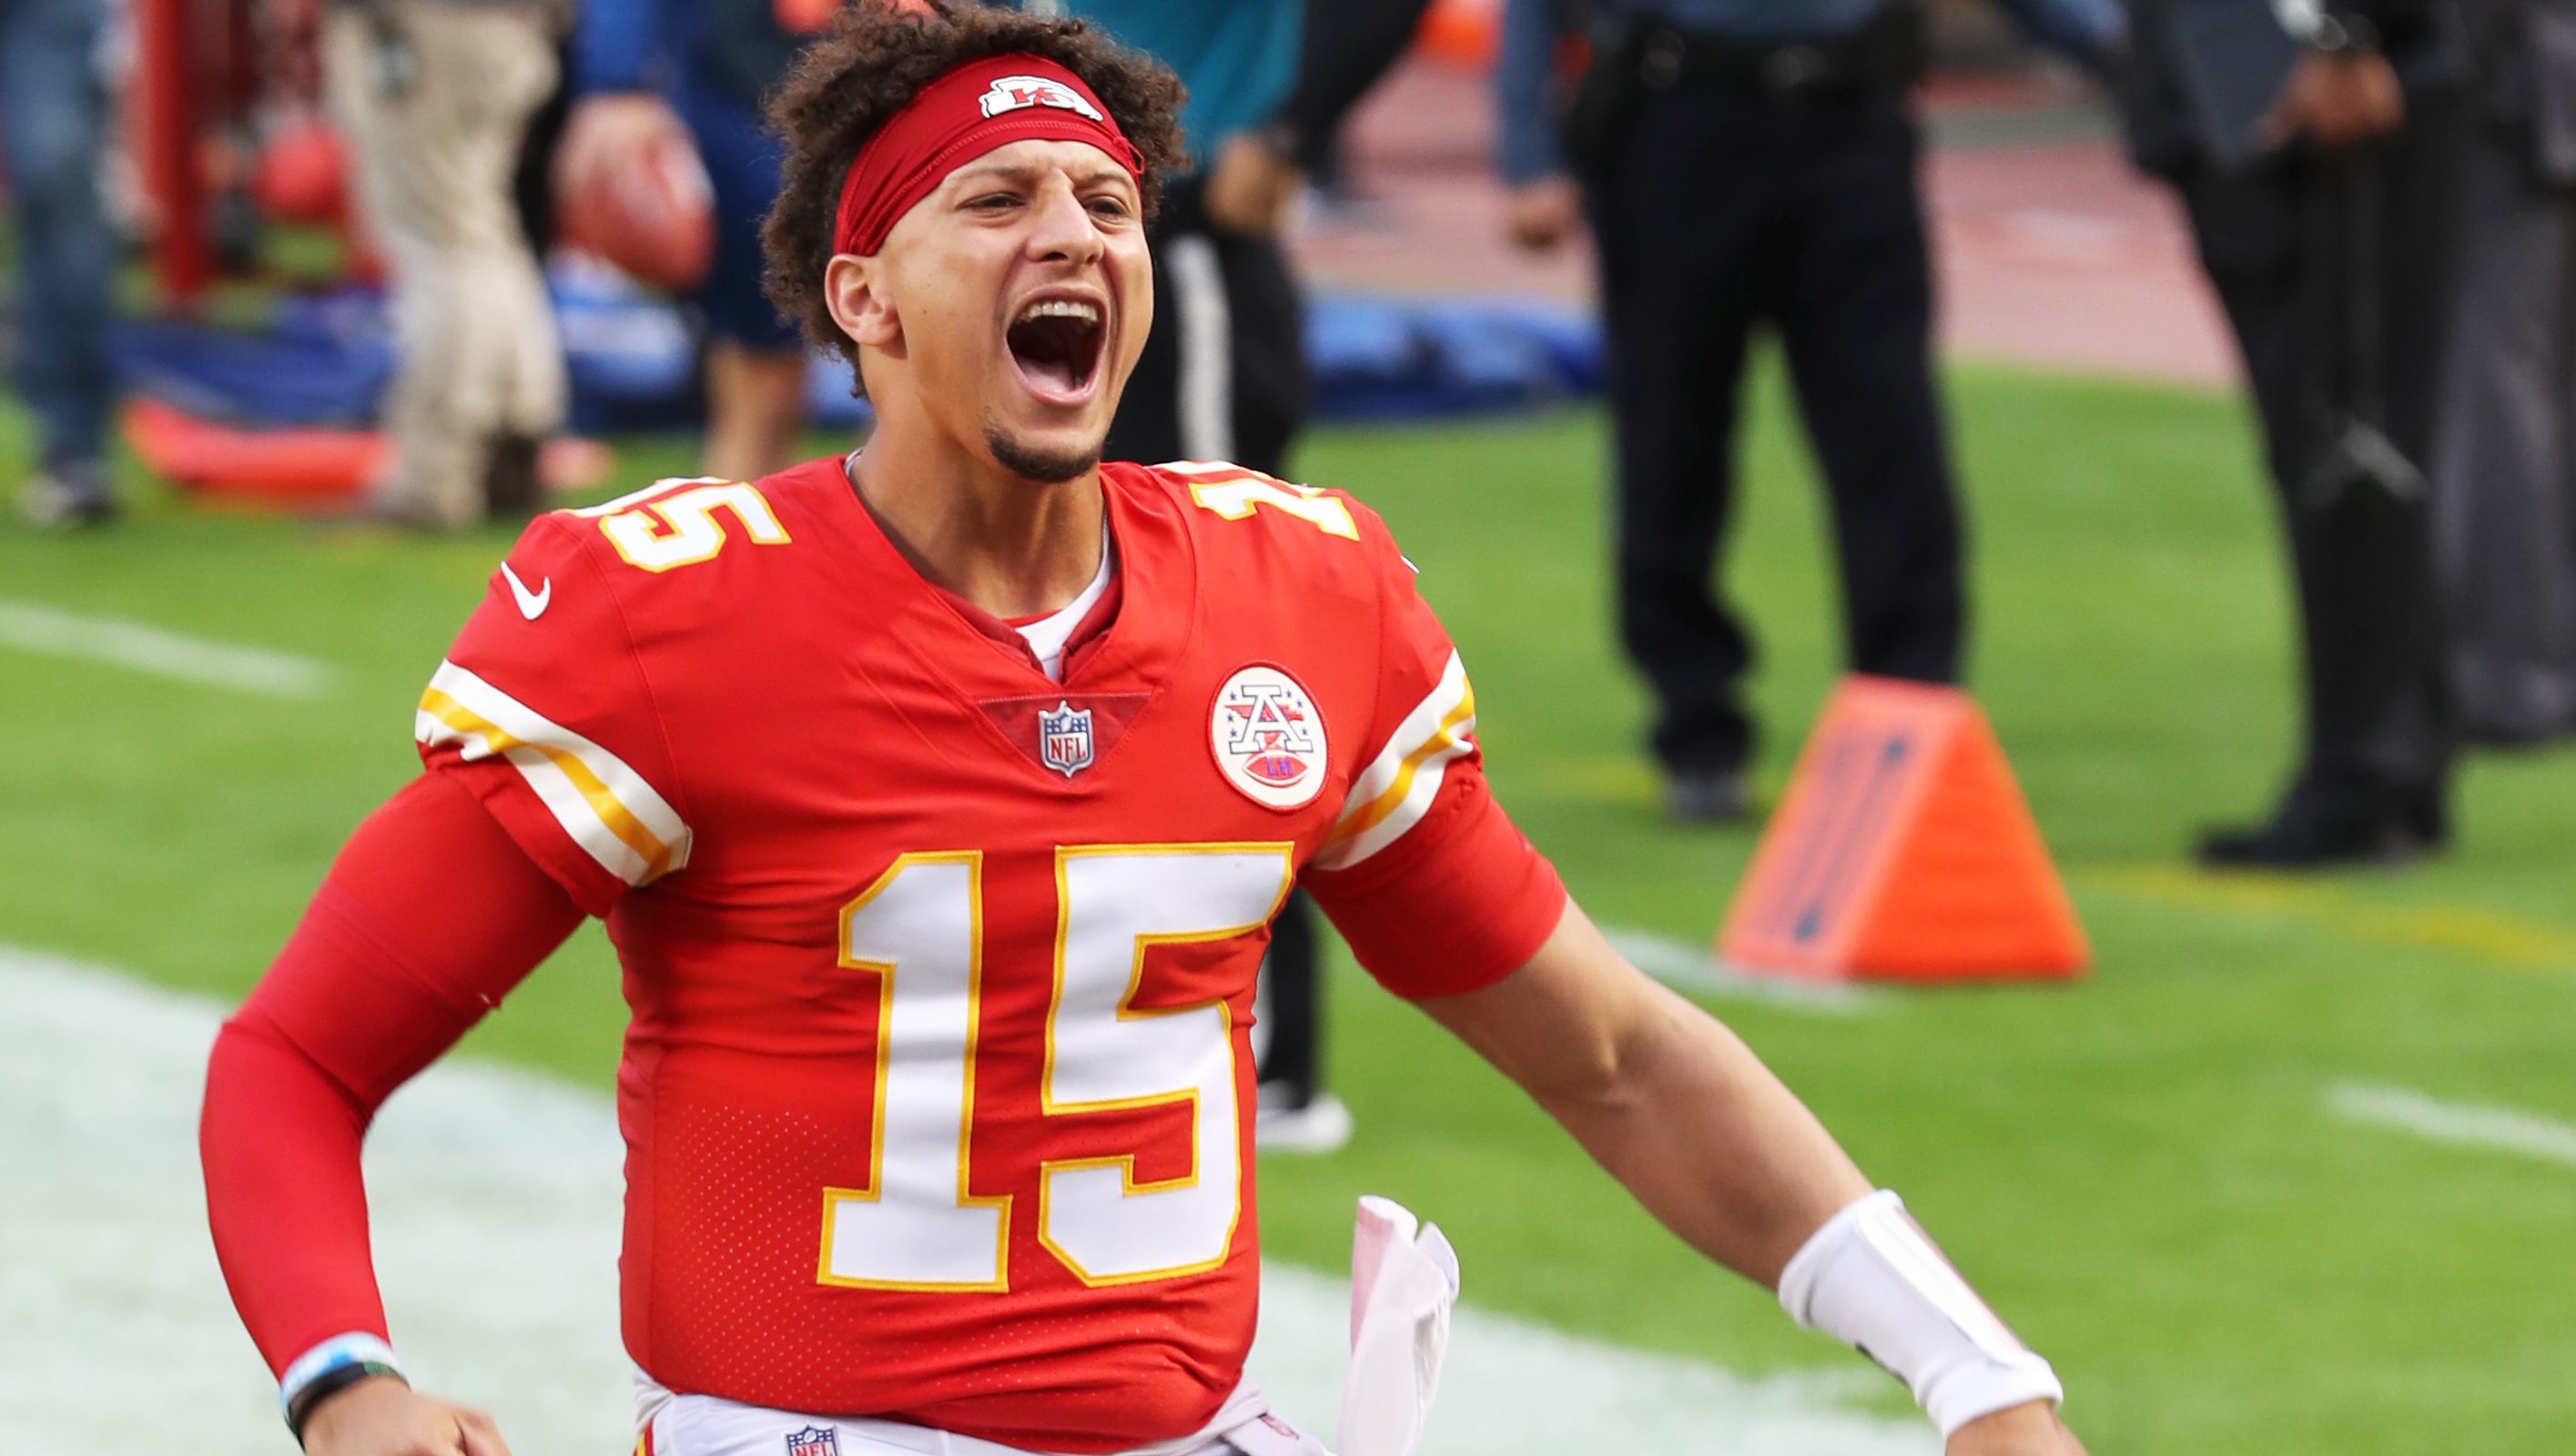 Patrick Mahomes II on Instagram: Seeing Red. 🔴😎  Kc chiefs football,  Kansas city chiefs football, Kansas city chiefs gifts